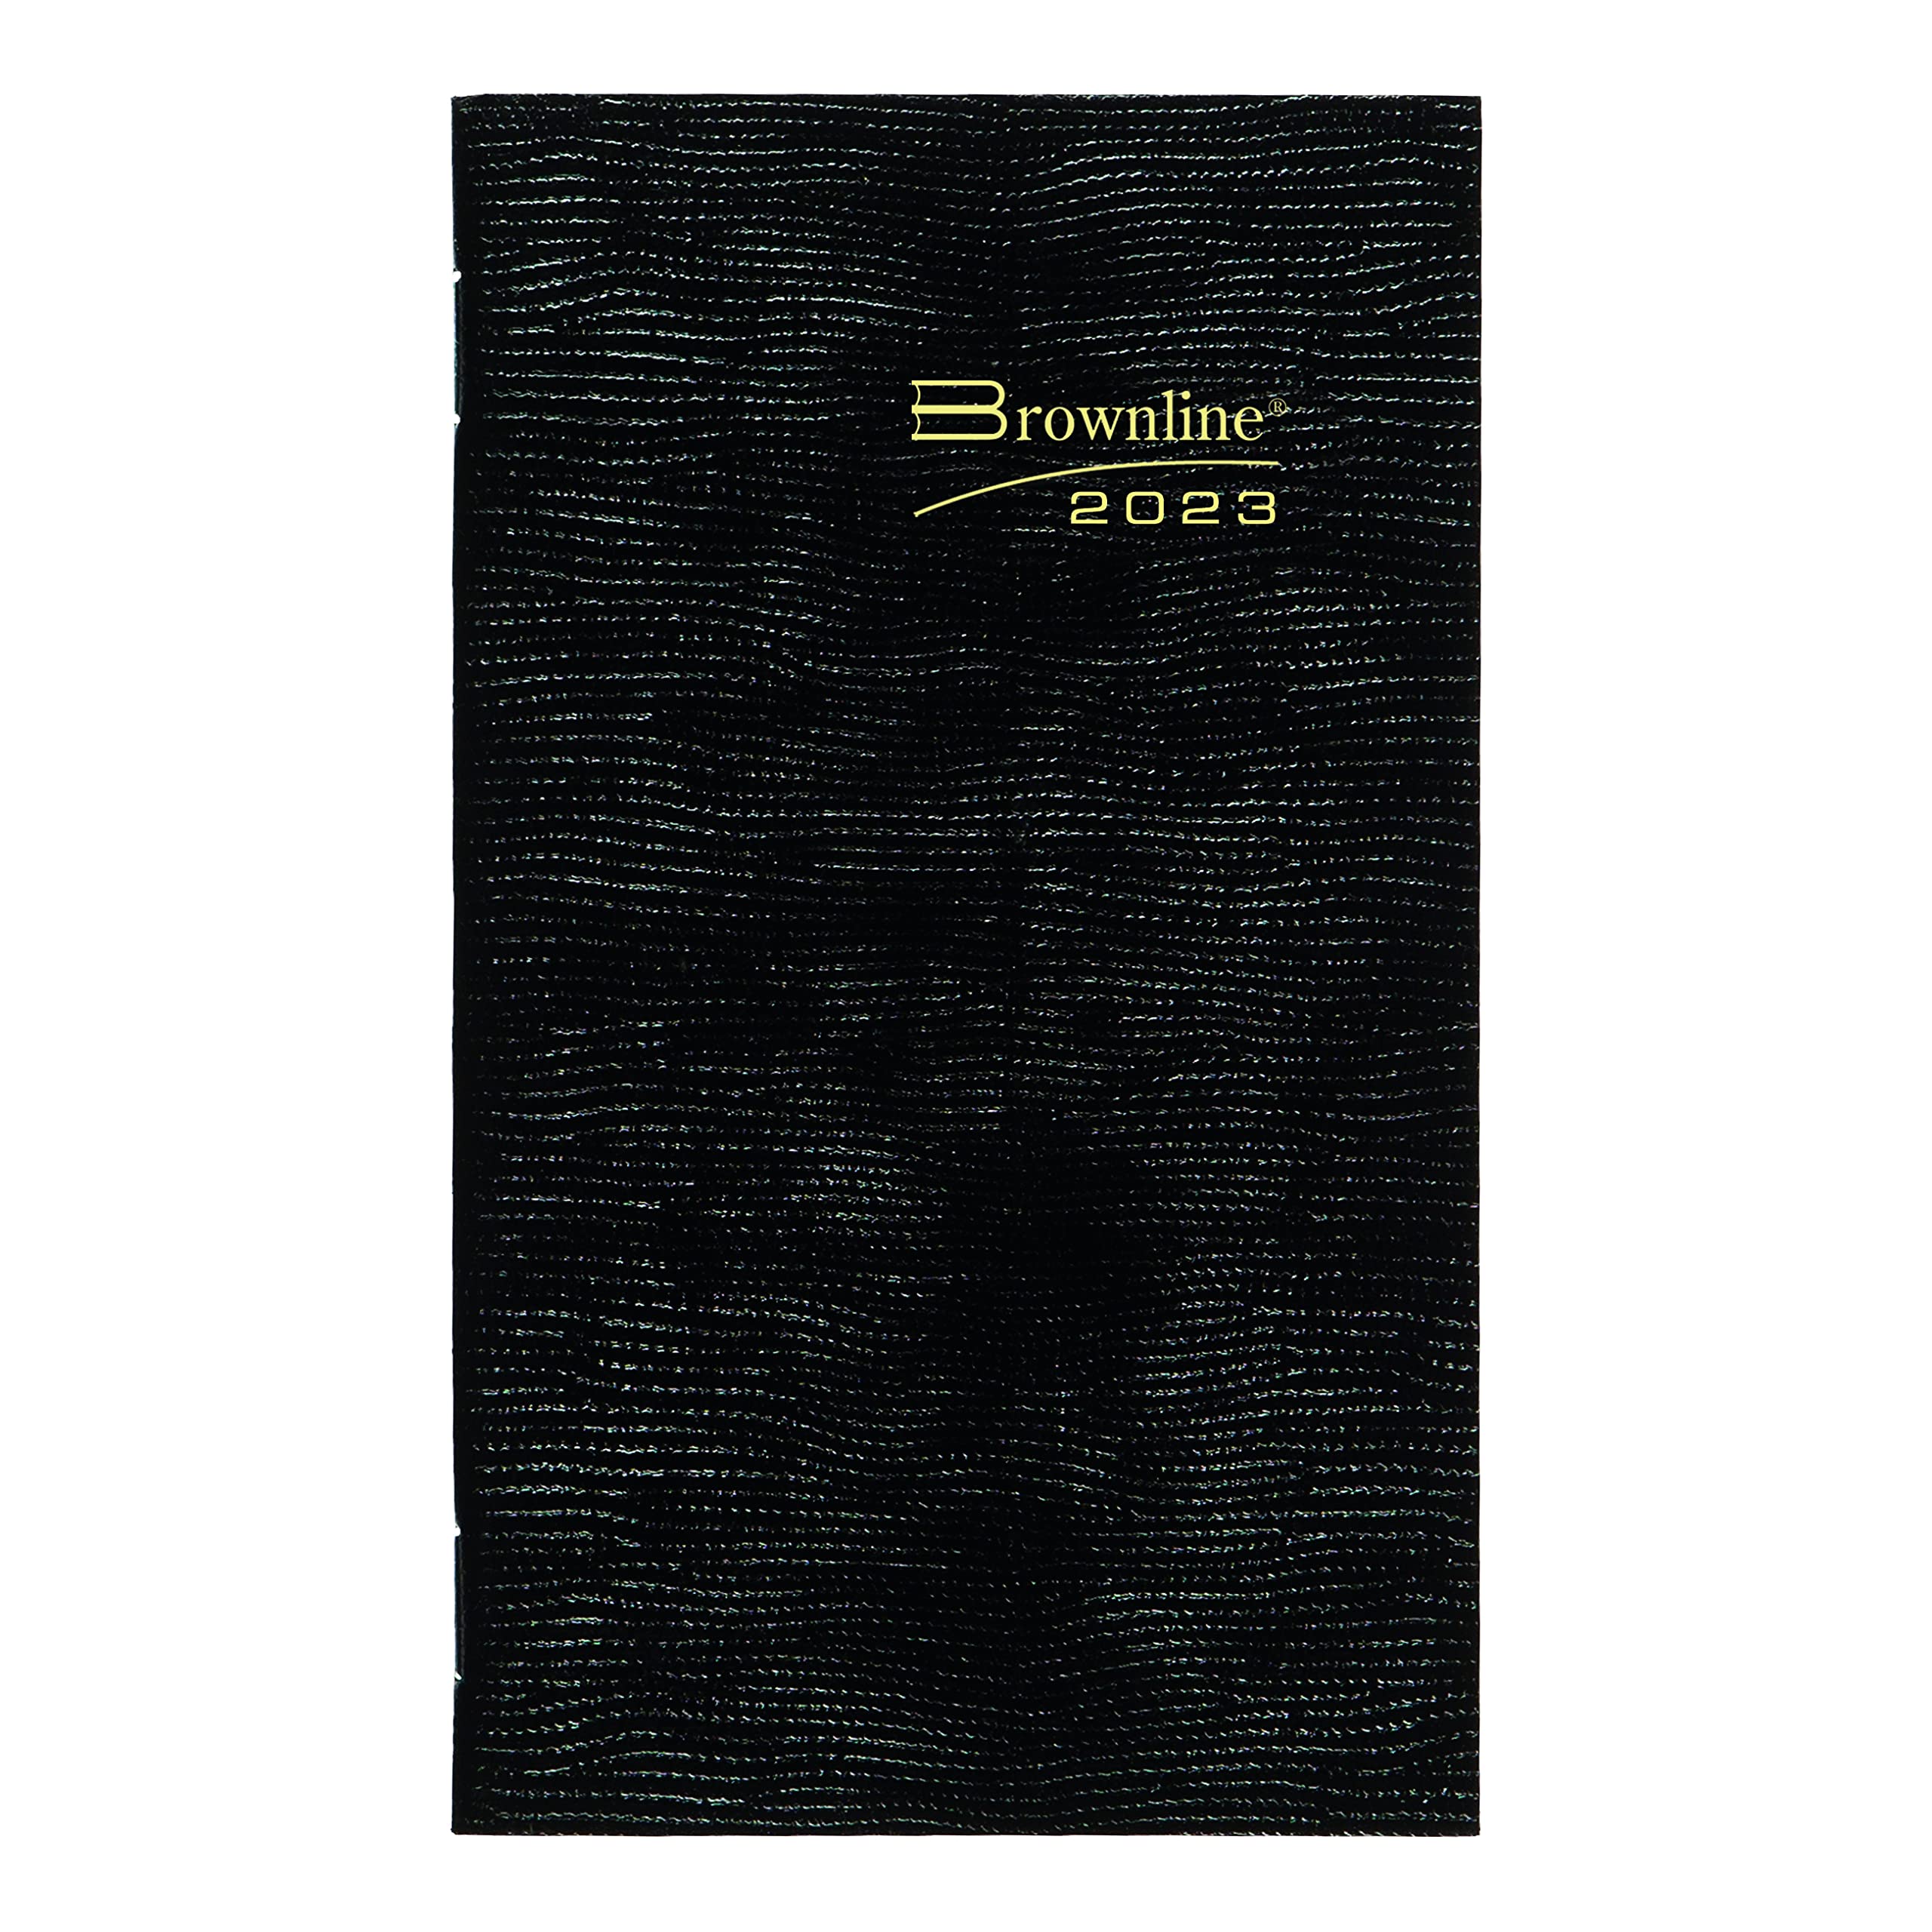 Brownline 2023 Essential Two-Week Pocket Planner, 12 Months, January to December, Stitched Binding, 6" x 3.5", Black (C5626.81Z-23)